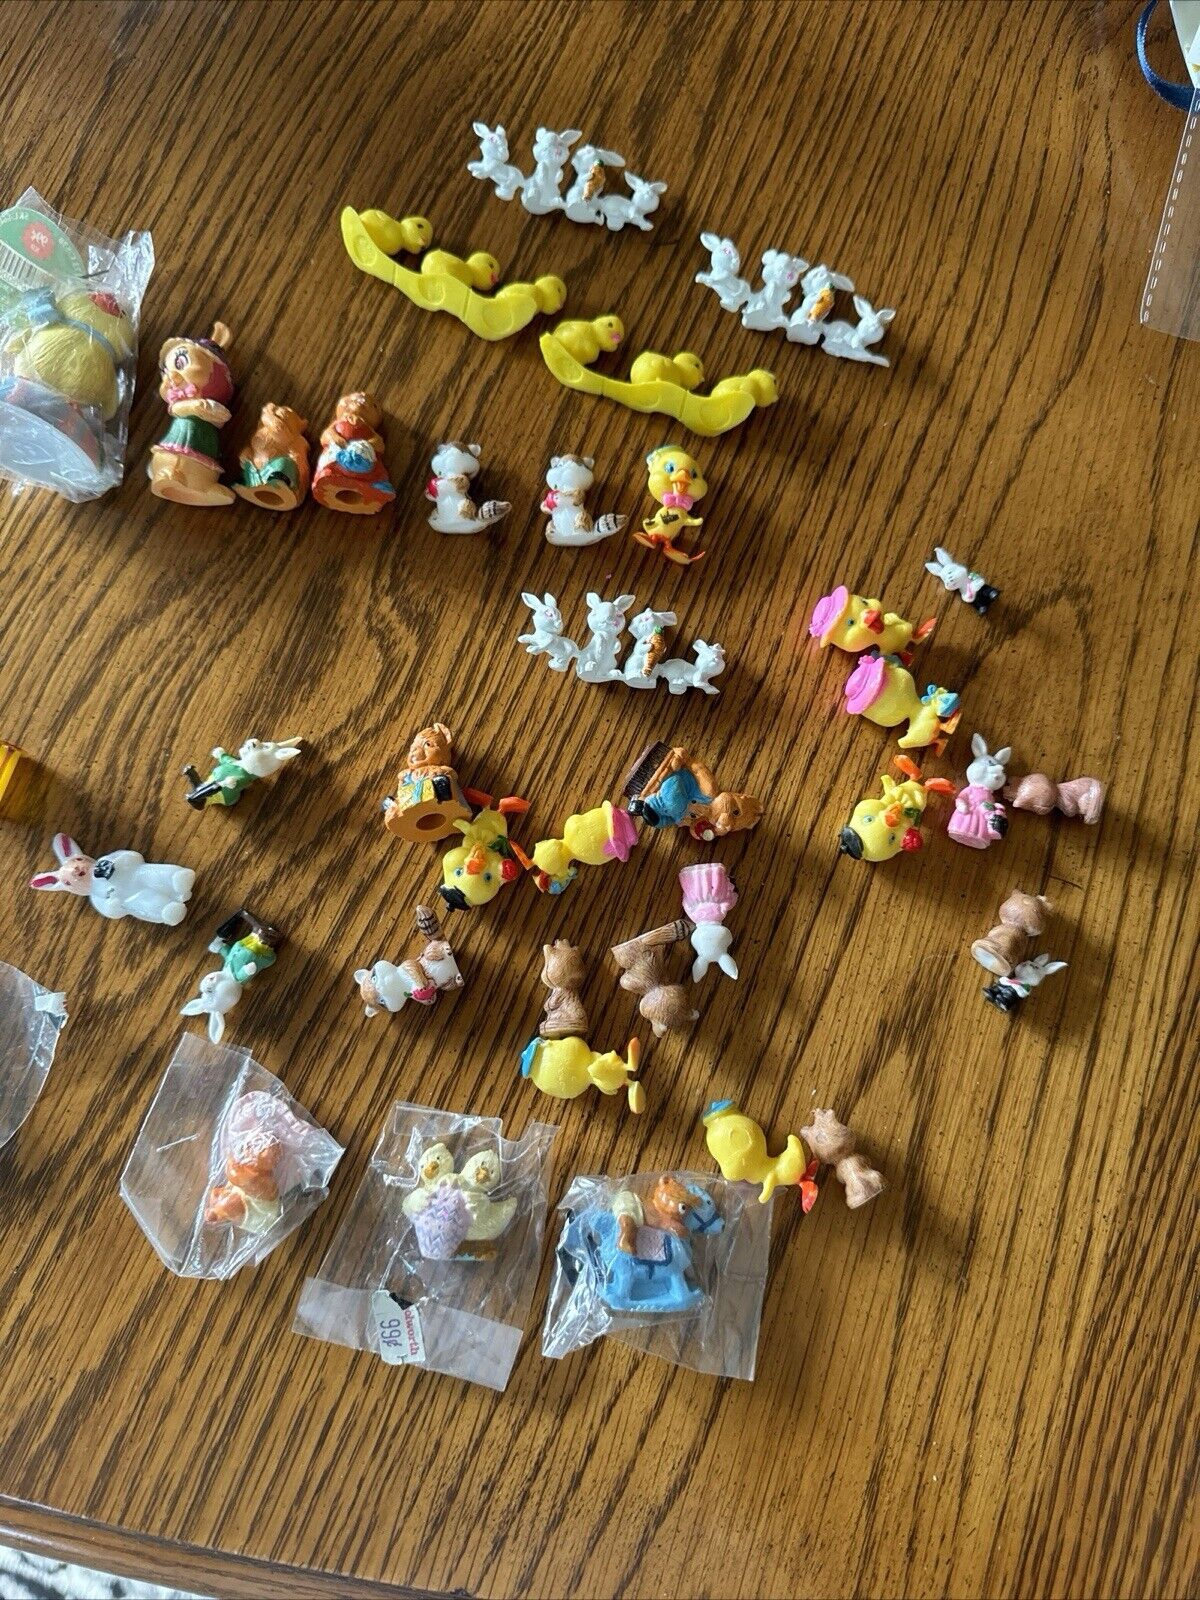 Easter Vintage Miniature Resin Ornaments Crafts Mini Lot of 50+ Chicks Bunnies